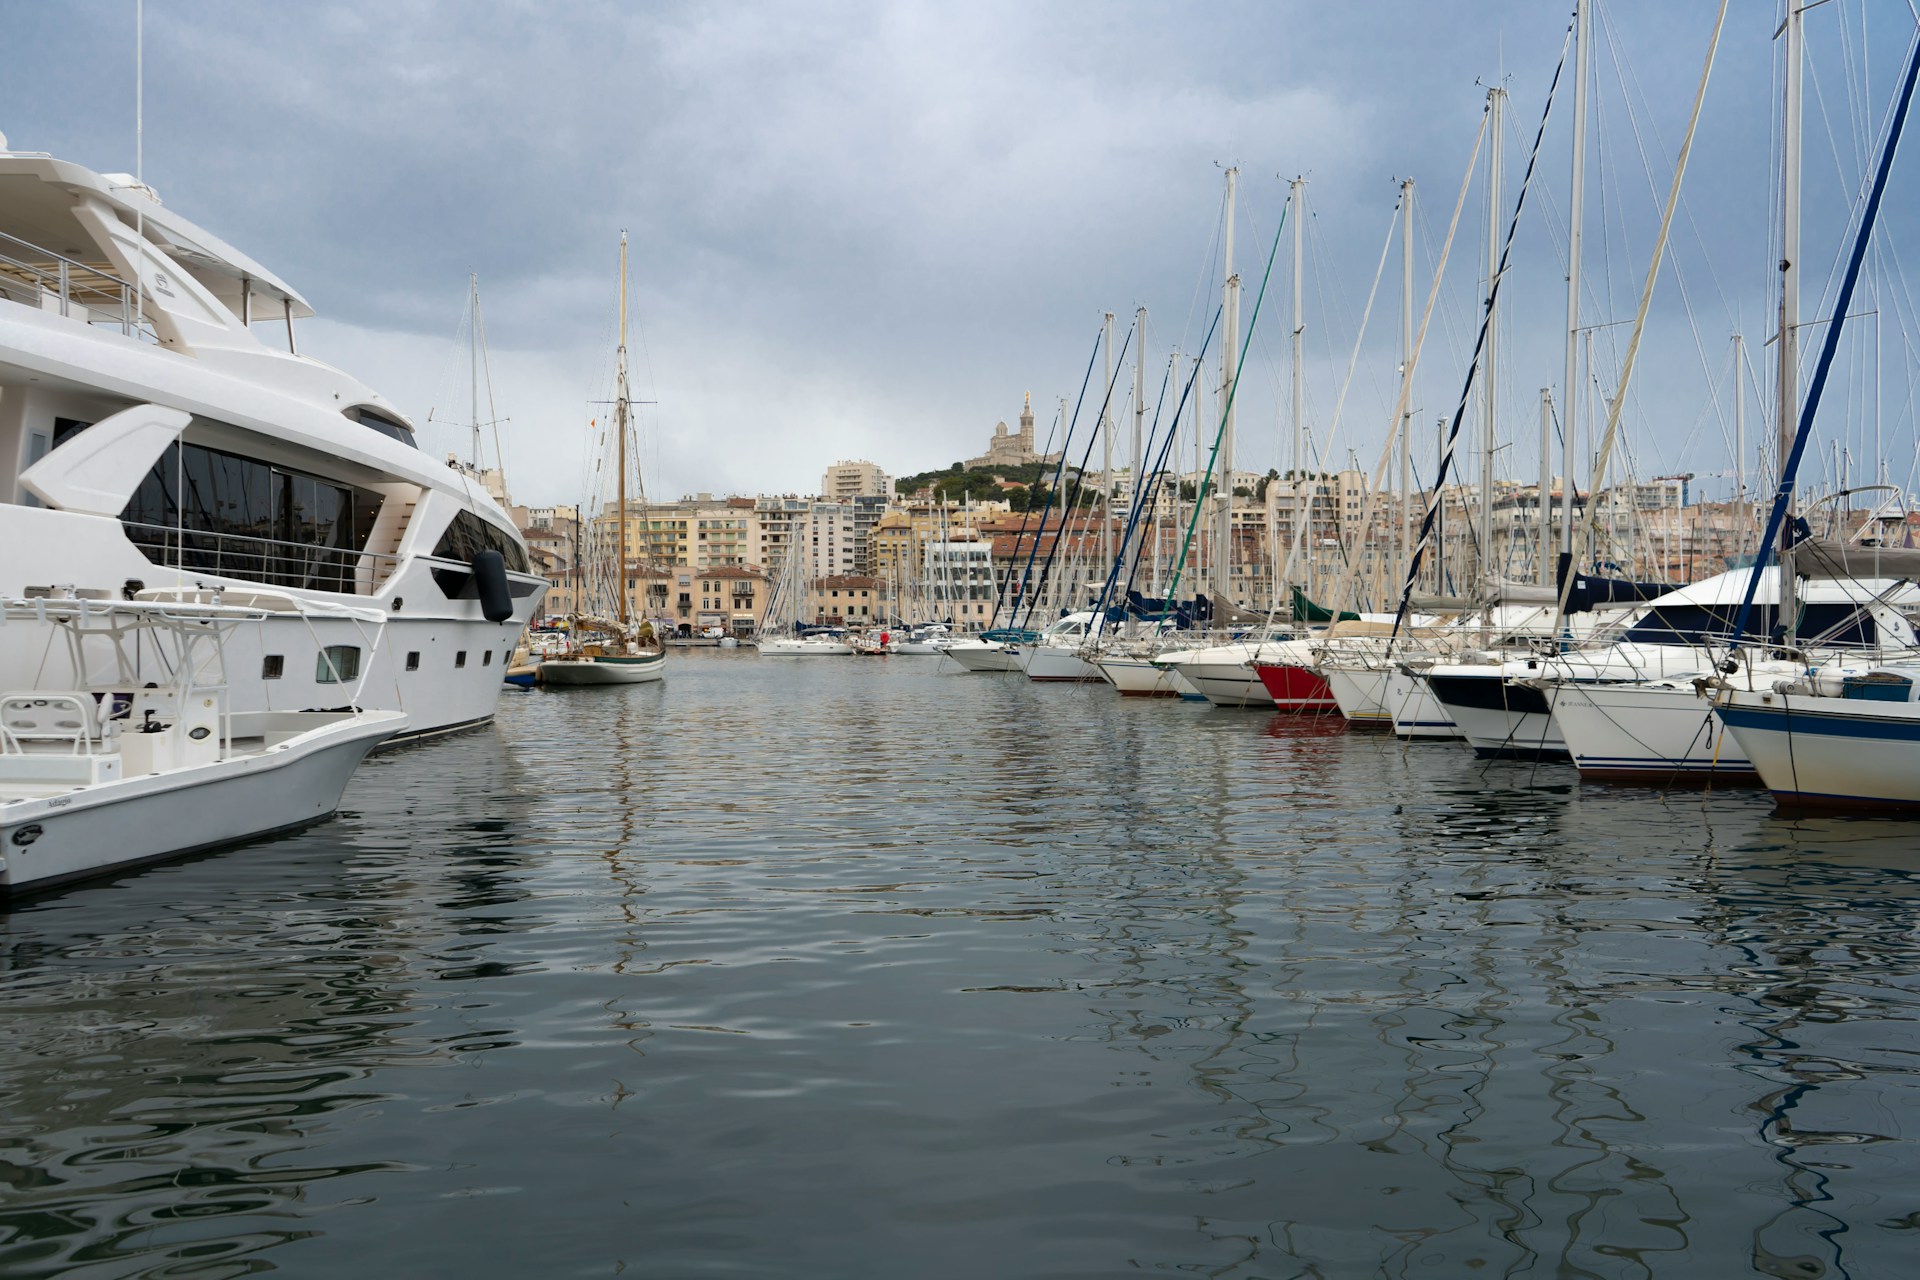 boats docked on a cloudy day in Marseille, France